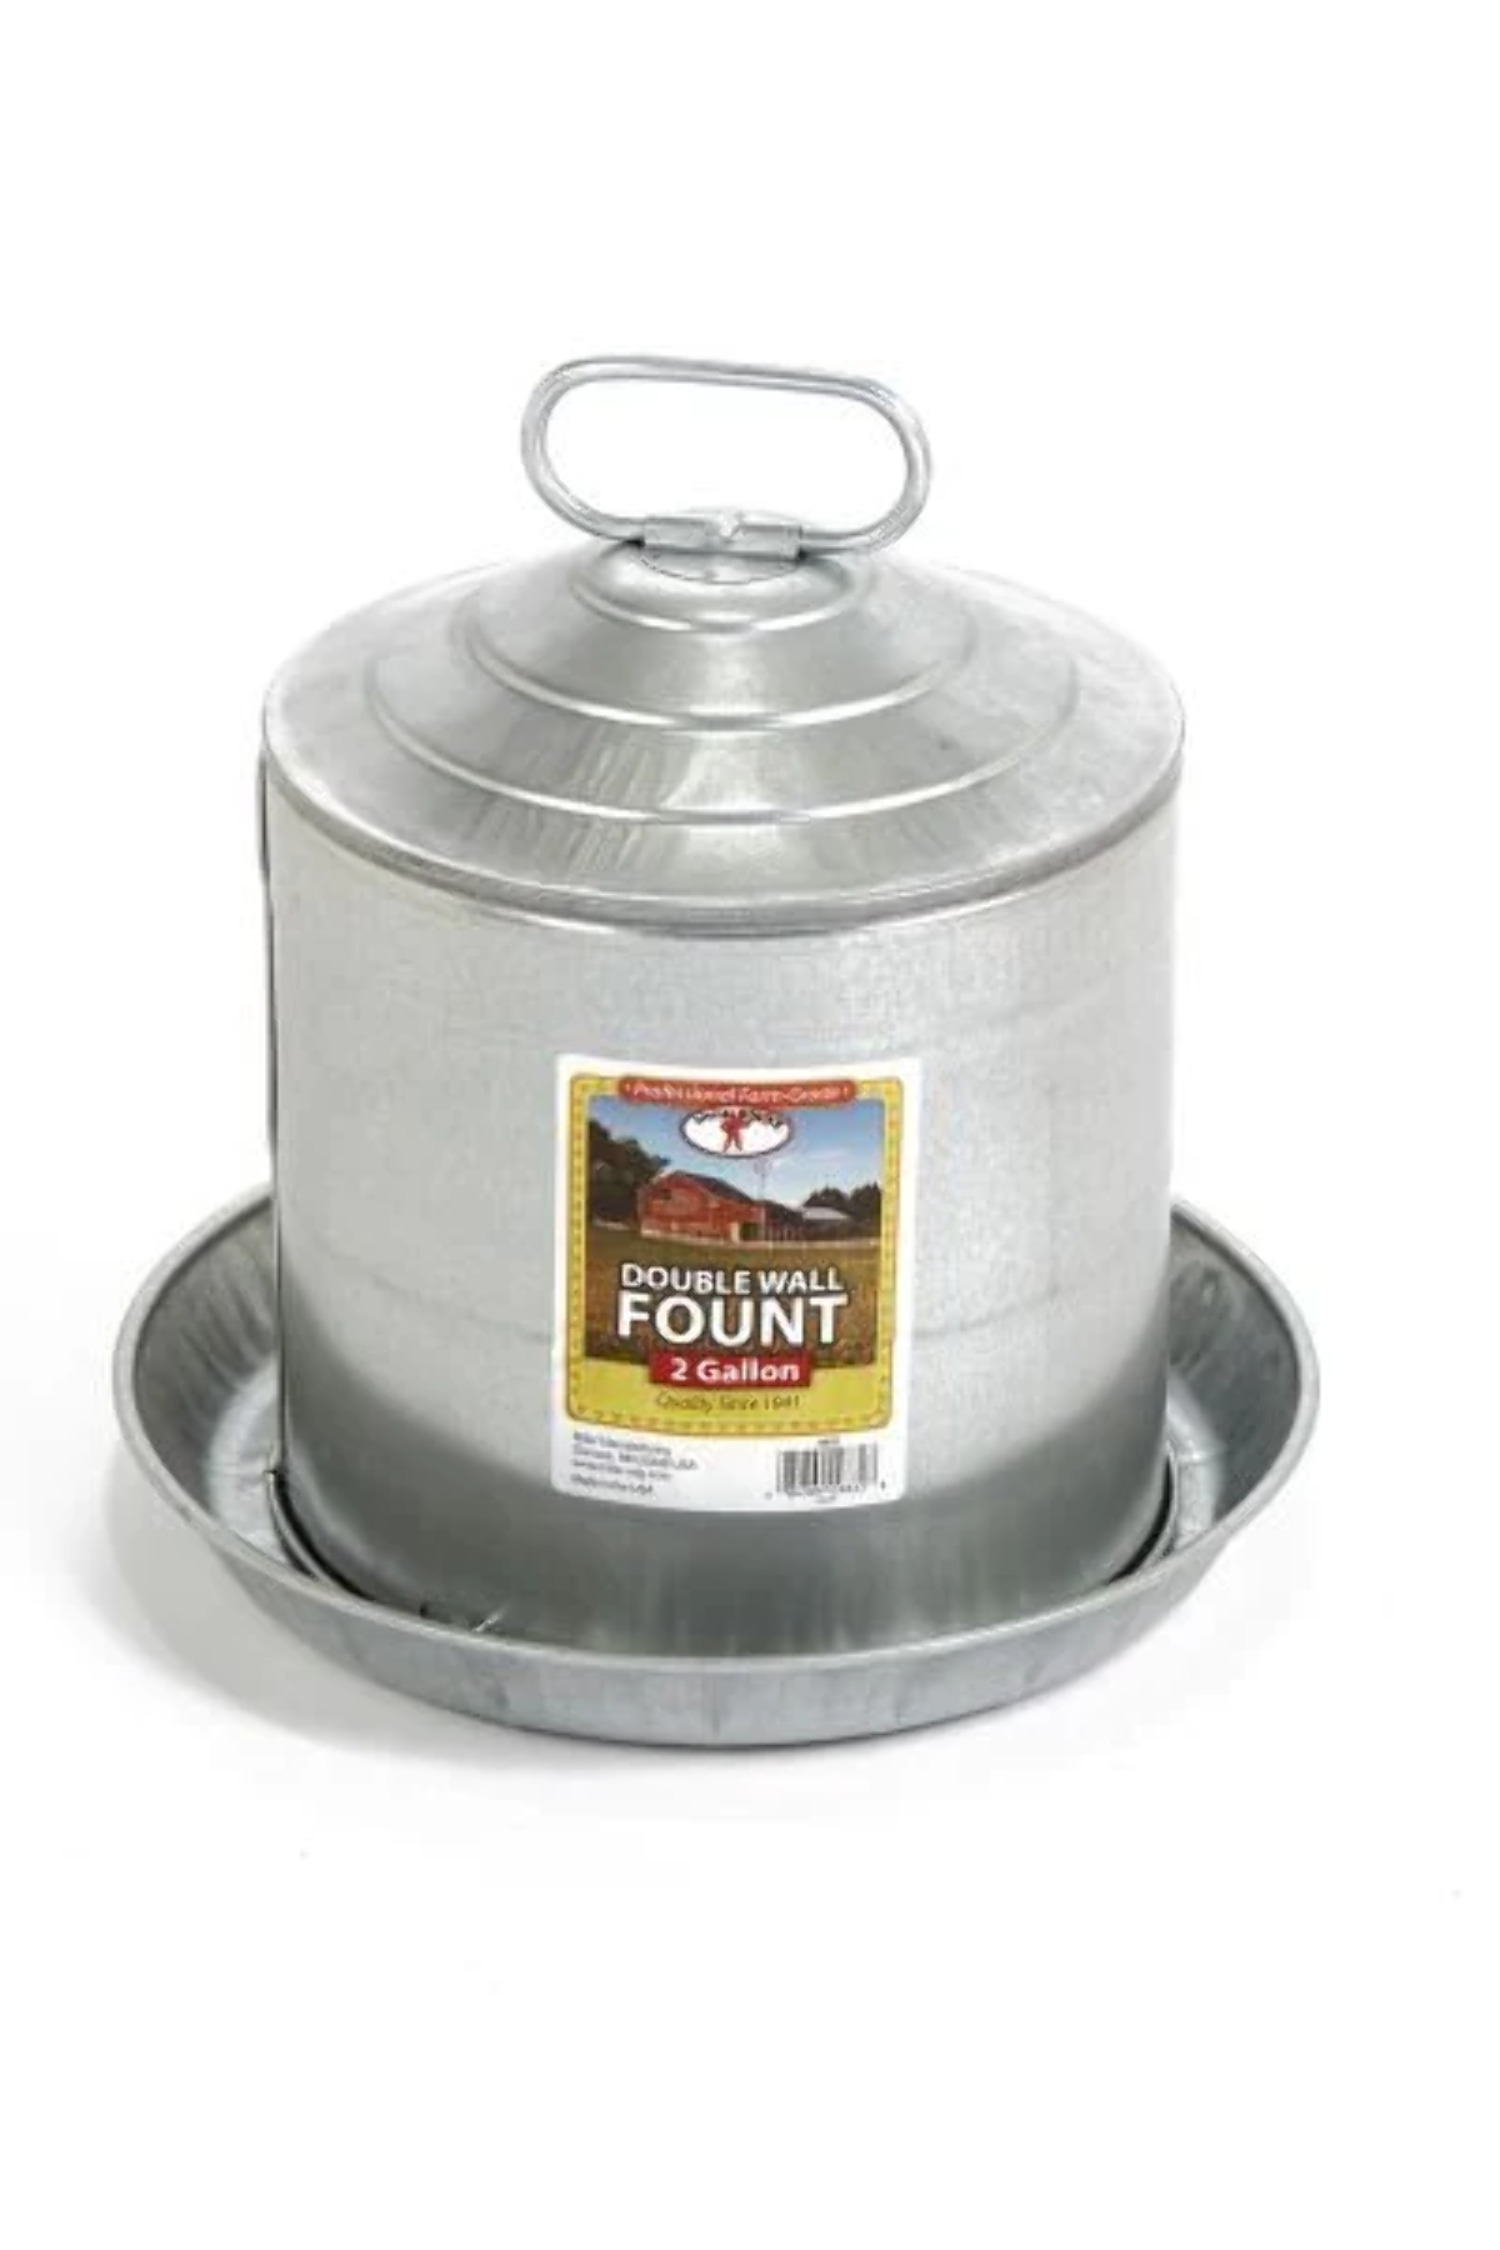 Little Giant Double Wall Metal Poultry Fount 2 Gallon - image 1 of 4